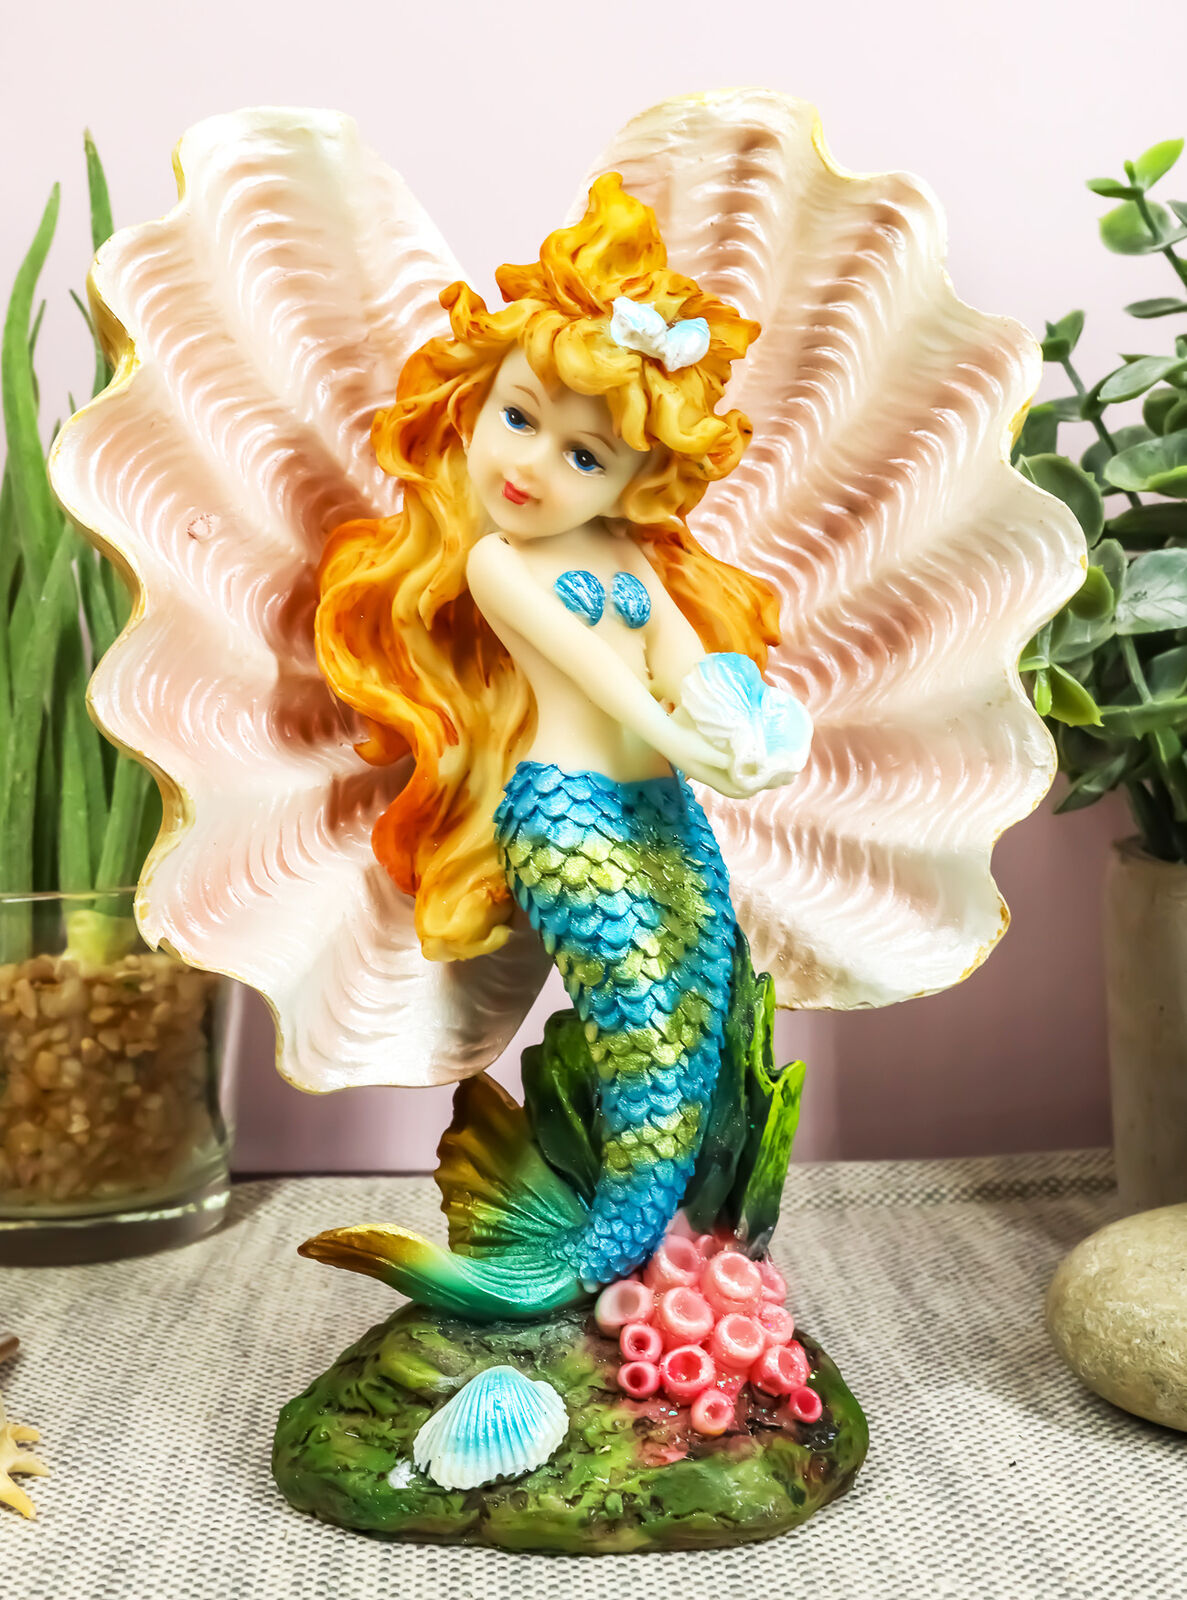 Aquamarine Mermaid Mergirl Holding Blue Sconce By Giant Pearl Shell Statue 7\